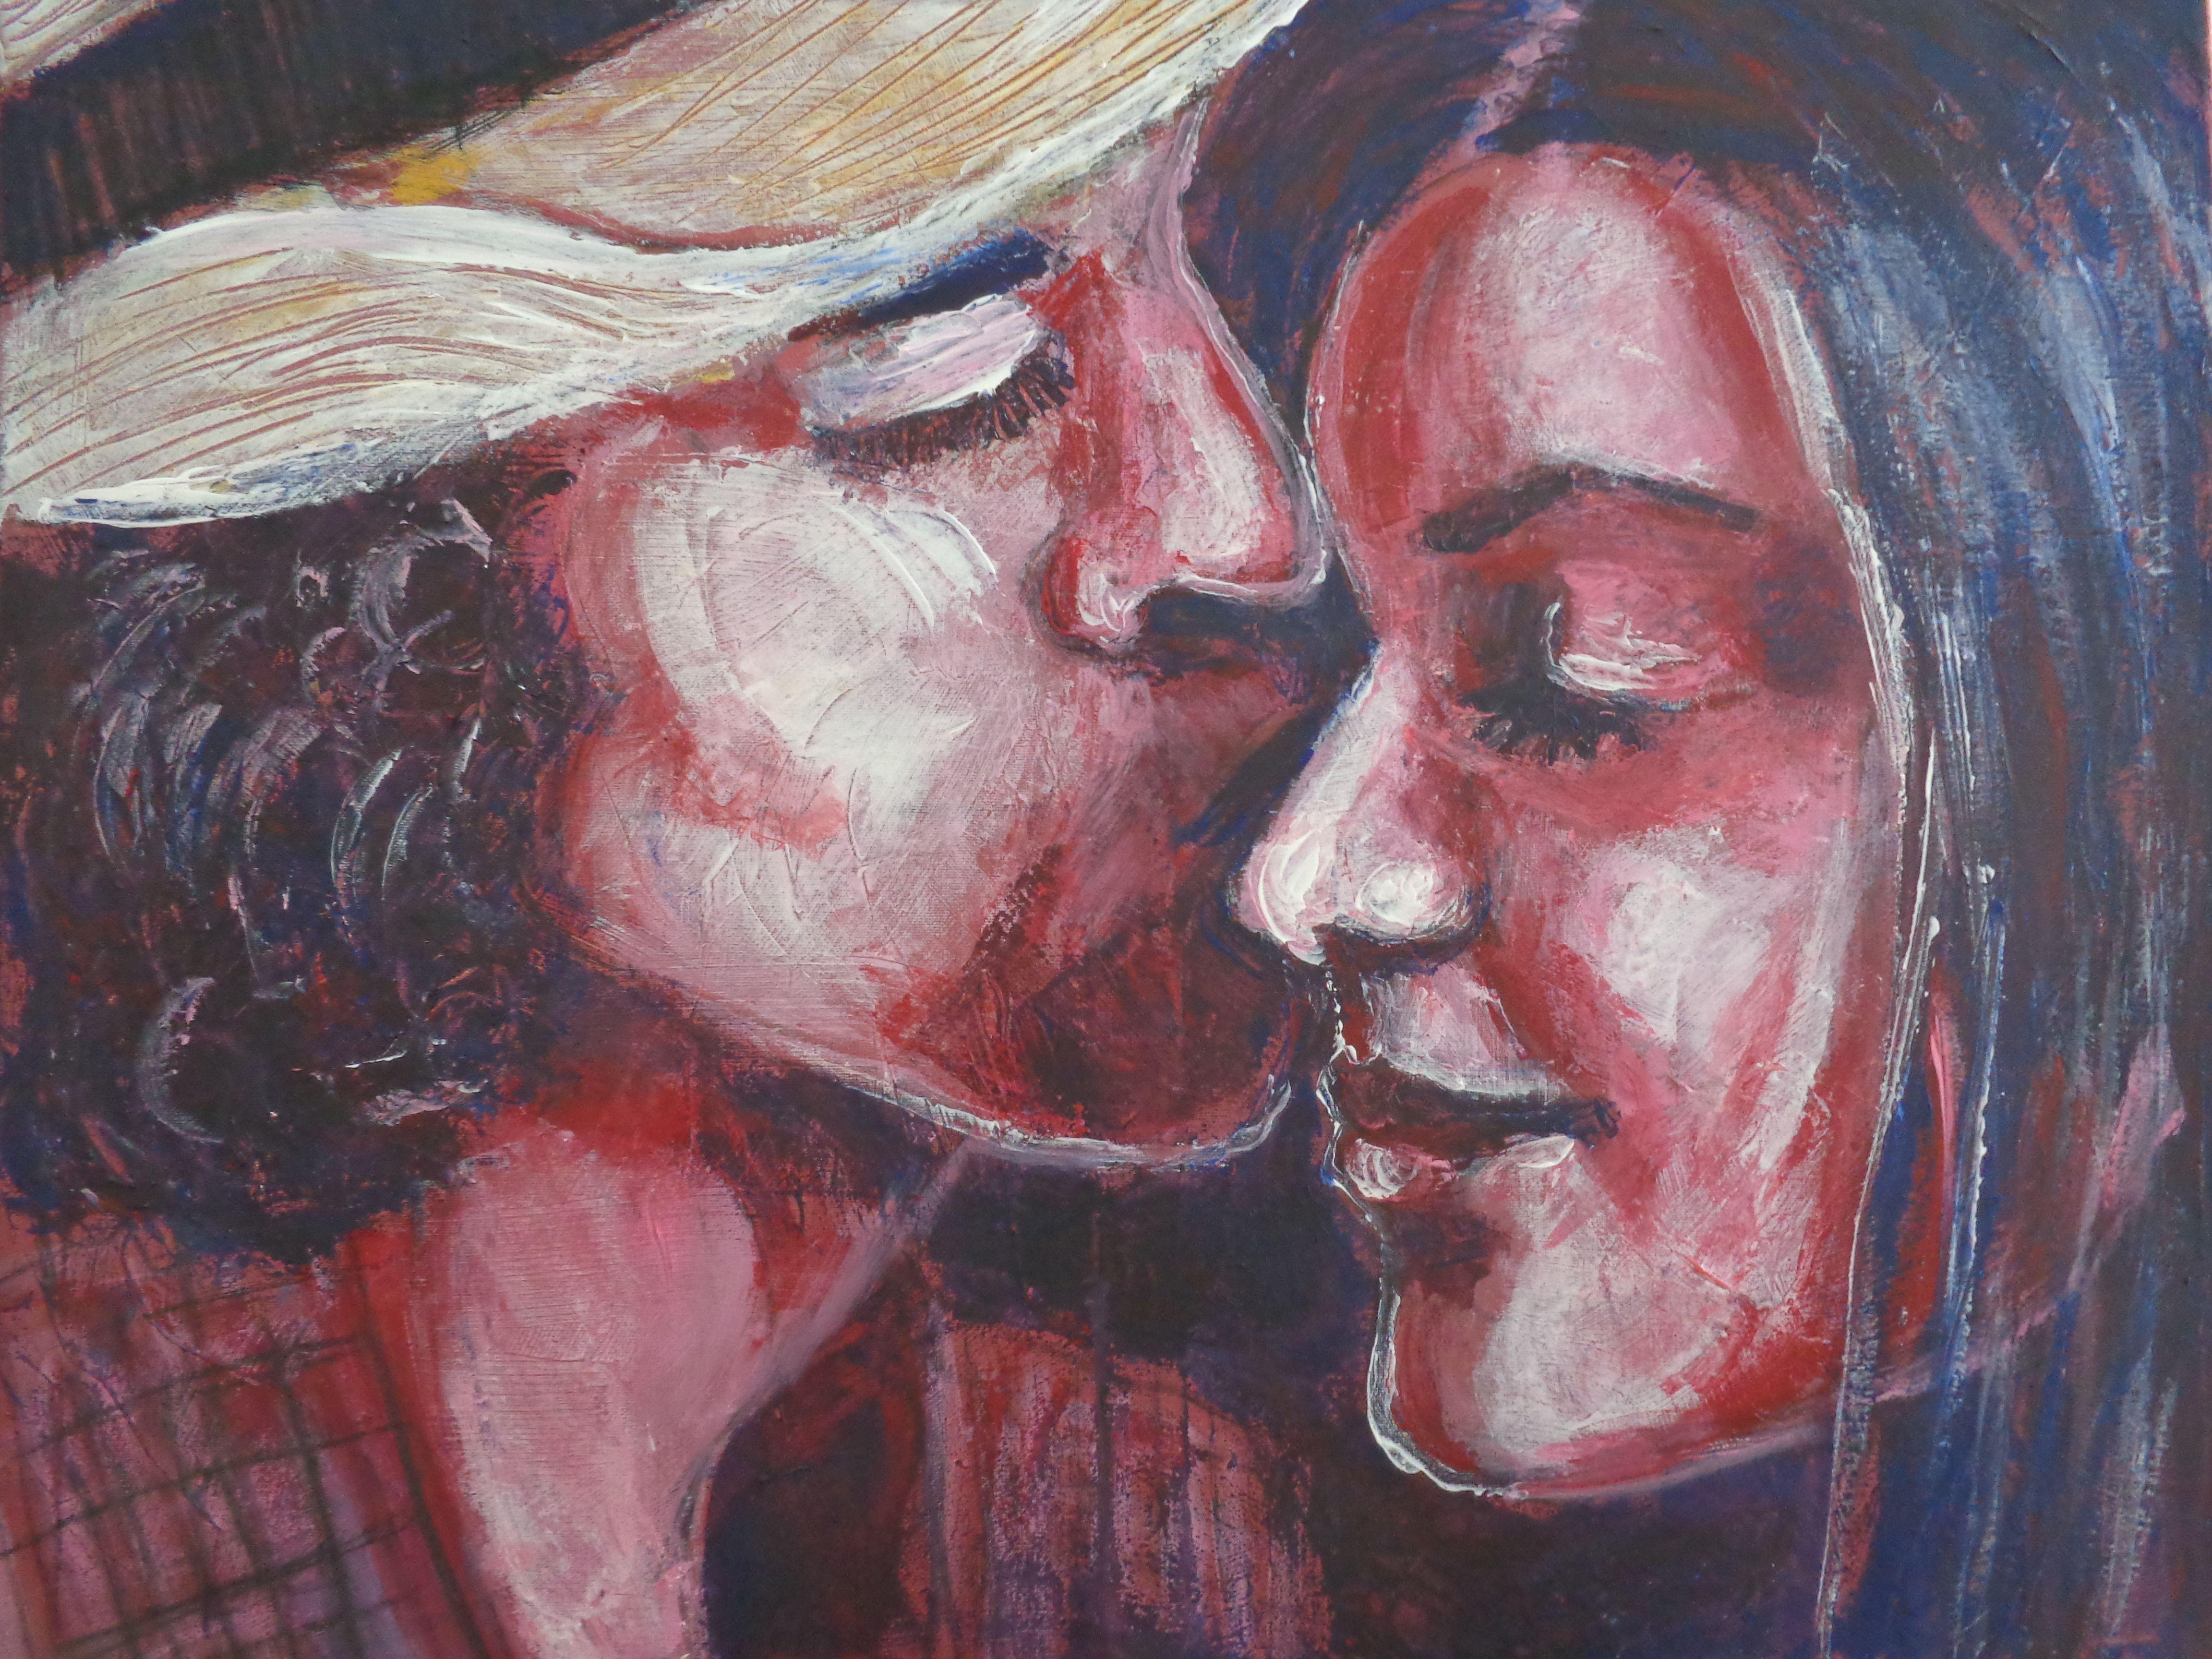 Original figurative acrylics painting on canvas, painted edges and ready to hang. A contemporary art work with interesting texture created using the palette knife techniques. A close-up portrait image of a romantic couple in love which accentuates